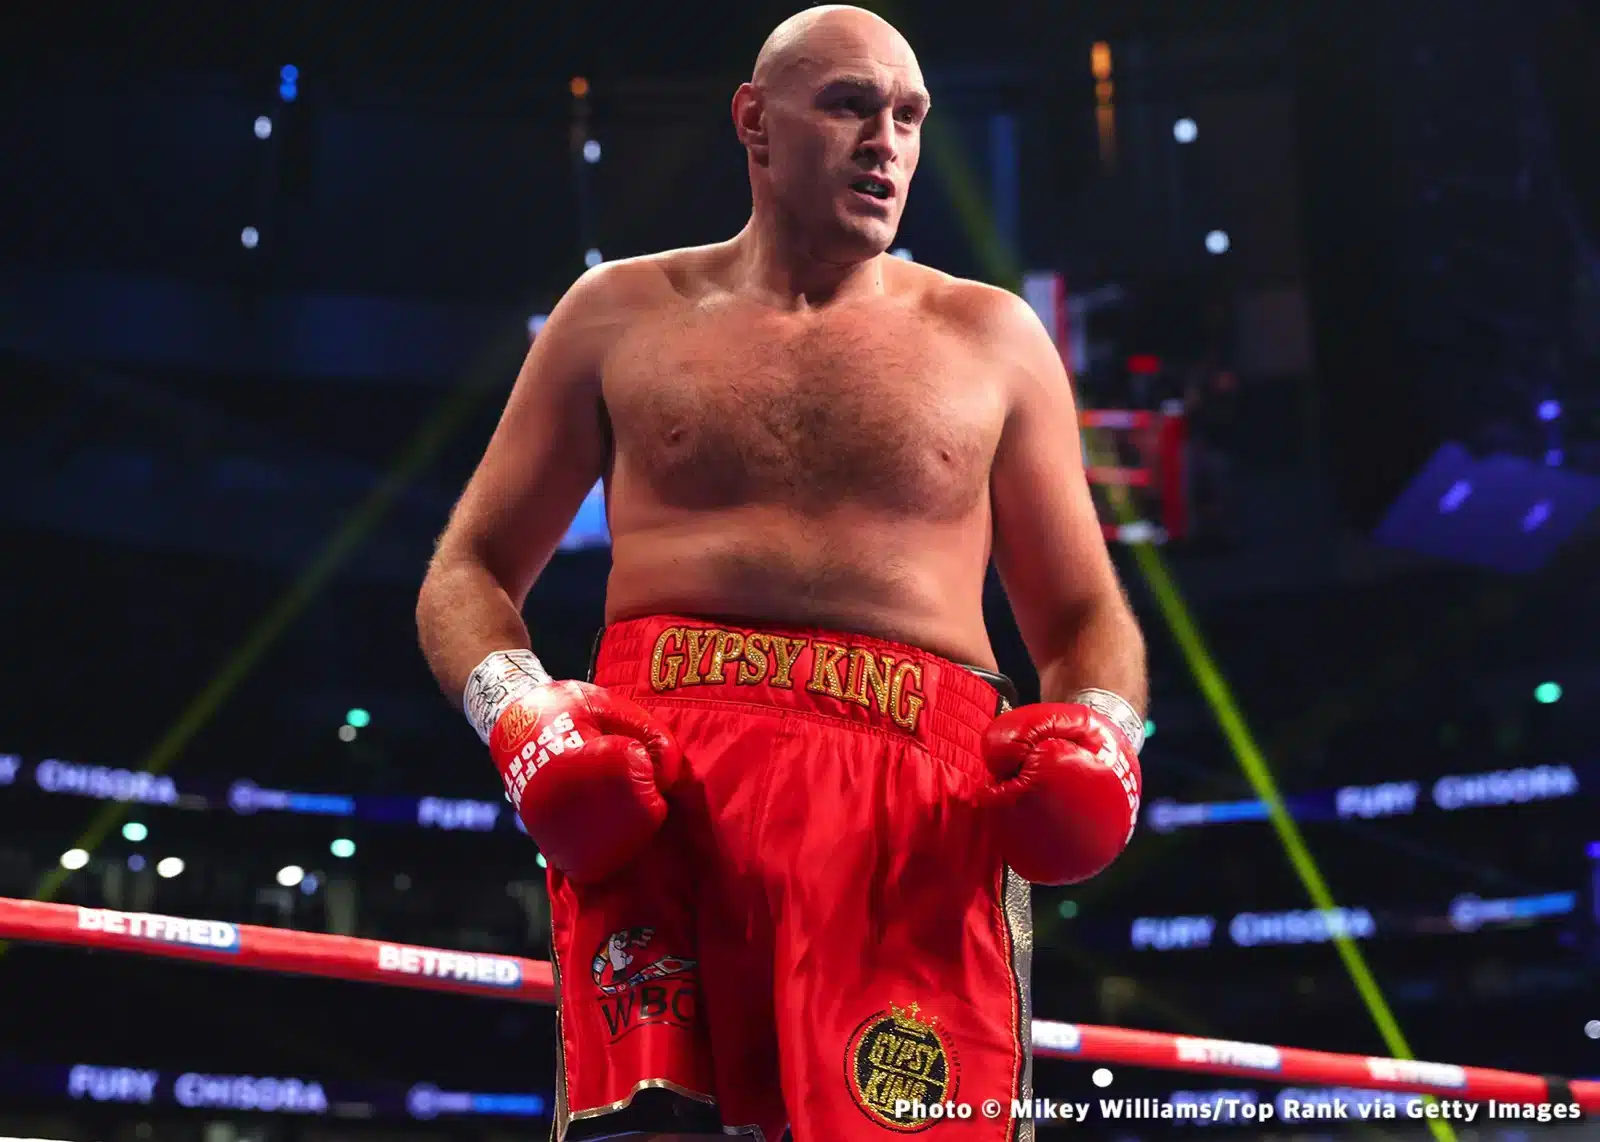 Image: Tyson Fury mouthing off, complaining no wants to fight him